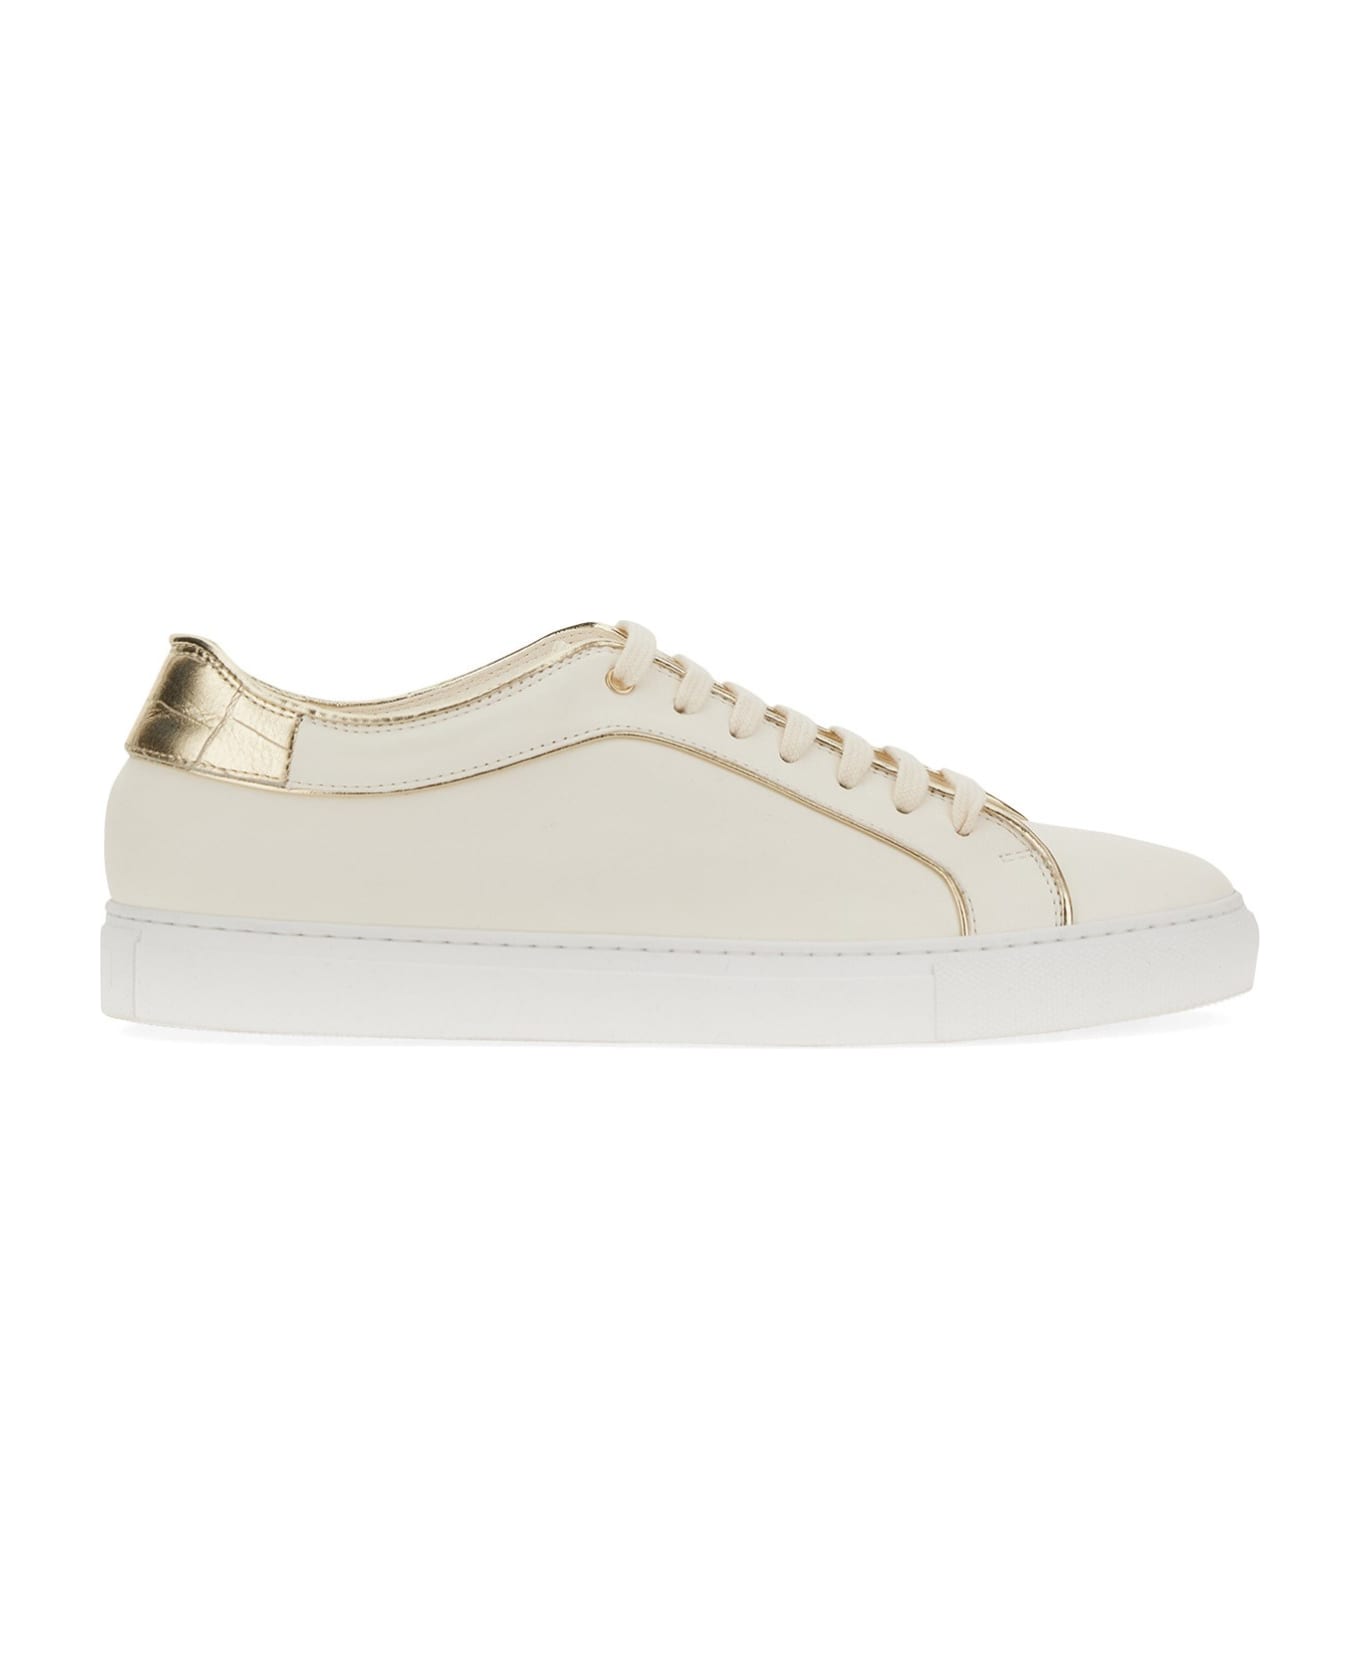 Paul Smith Leather Sneaker - BIANCO